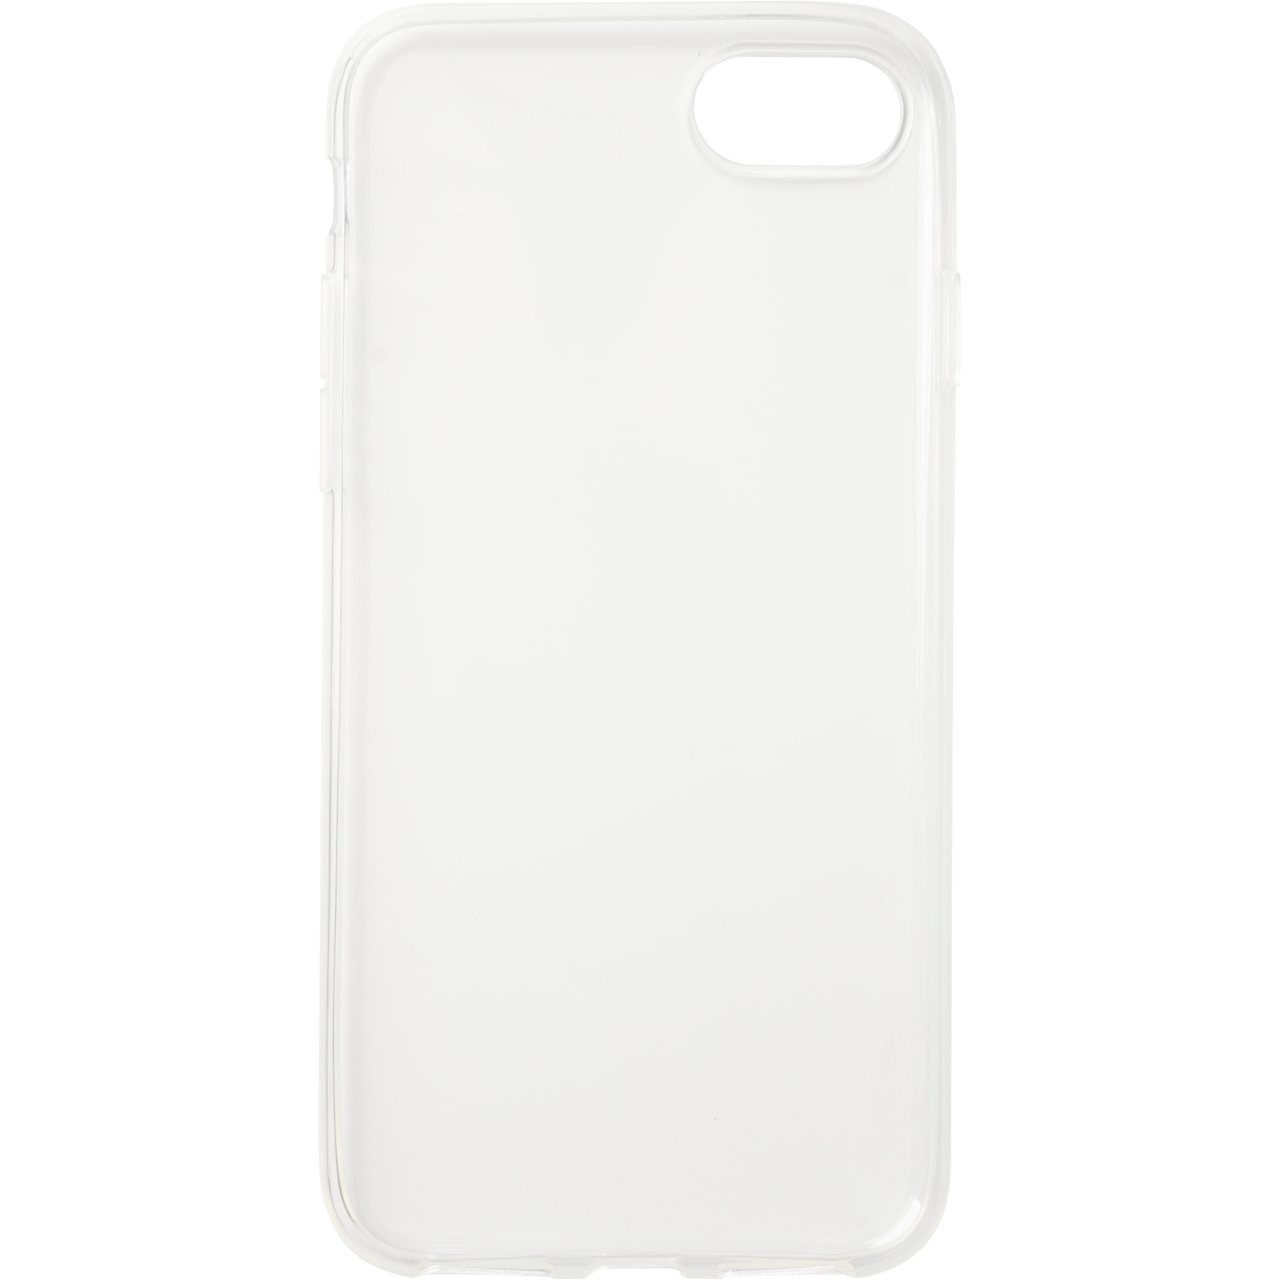 LEKI BYCPH CLEAR COVER TIL IPHONE 6/7/8